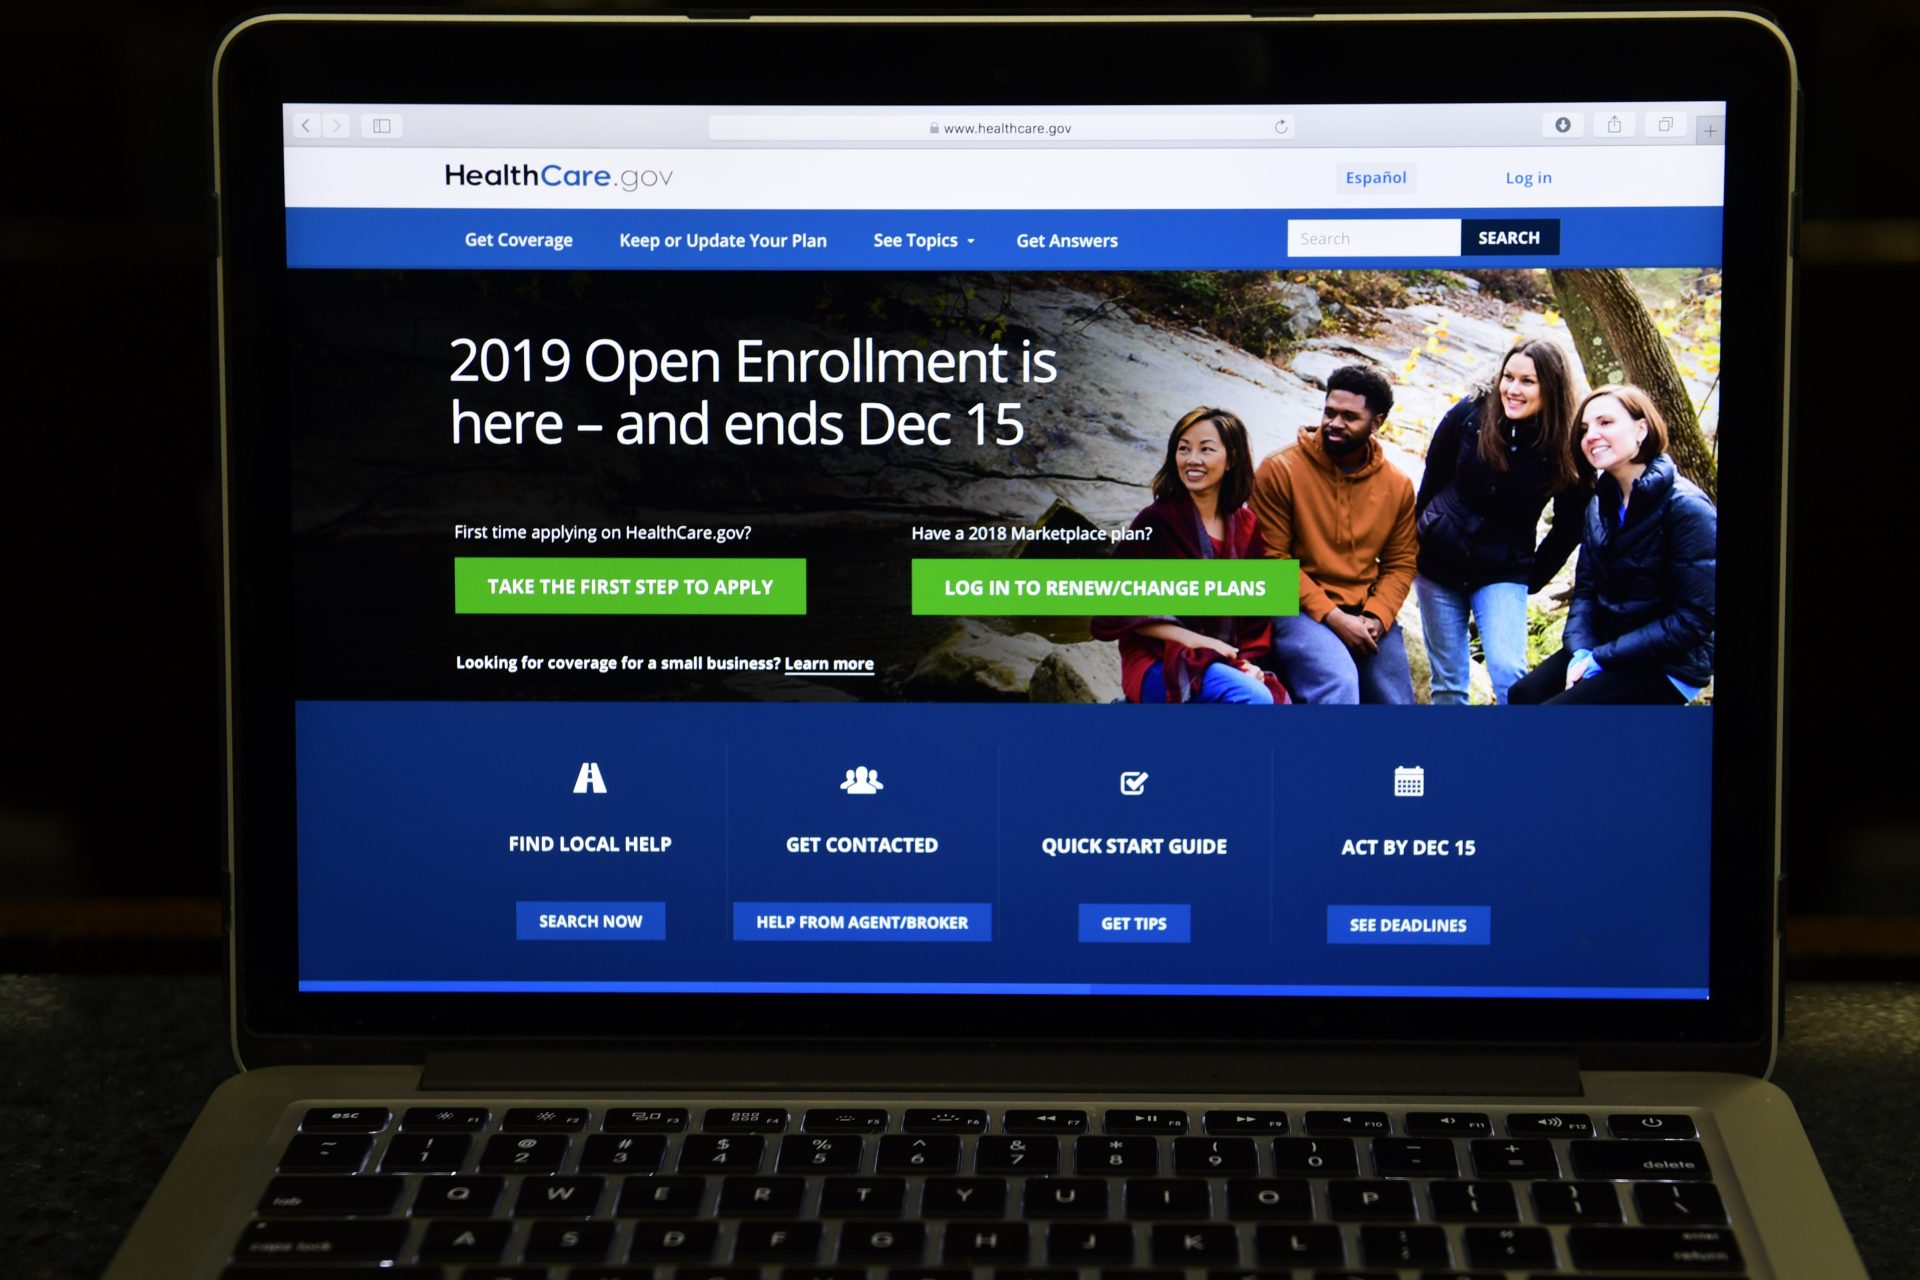 FILE PHOTO: In this Nov. 1, 2018, file photo, the federal website where consumers can sign up for health insurance under the Affordable Care Act is shown on a computer screen in Washington. The health care sector is getting punished before the opening bell Monday, Dec. 17, after a federal judge in Texas ruled Friday that the Affordable Care Act is unconstitutional.